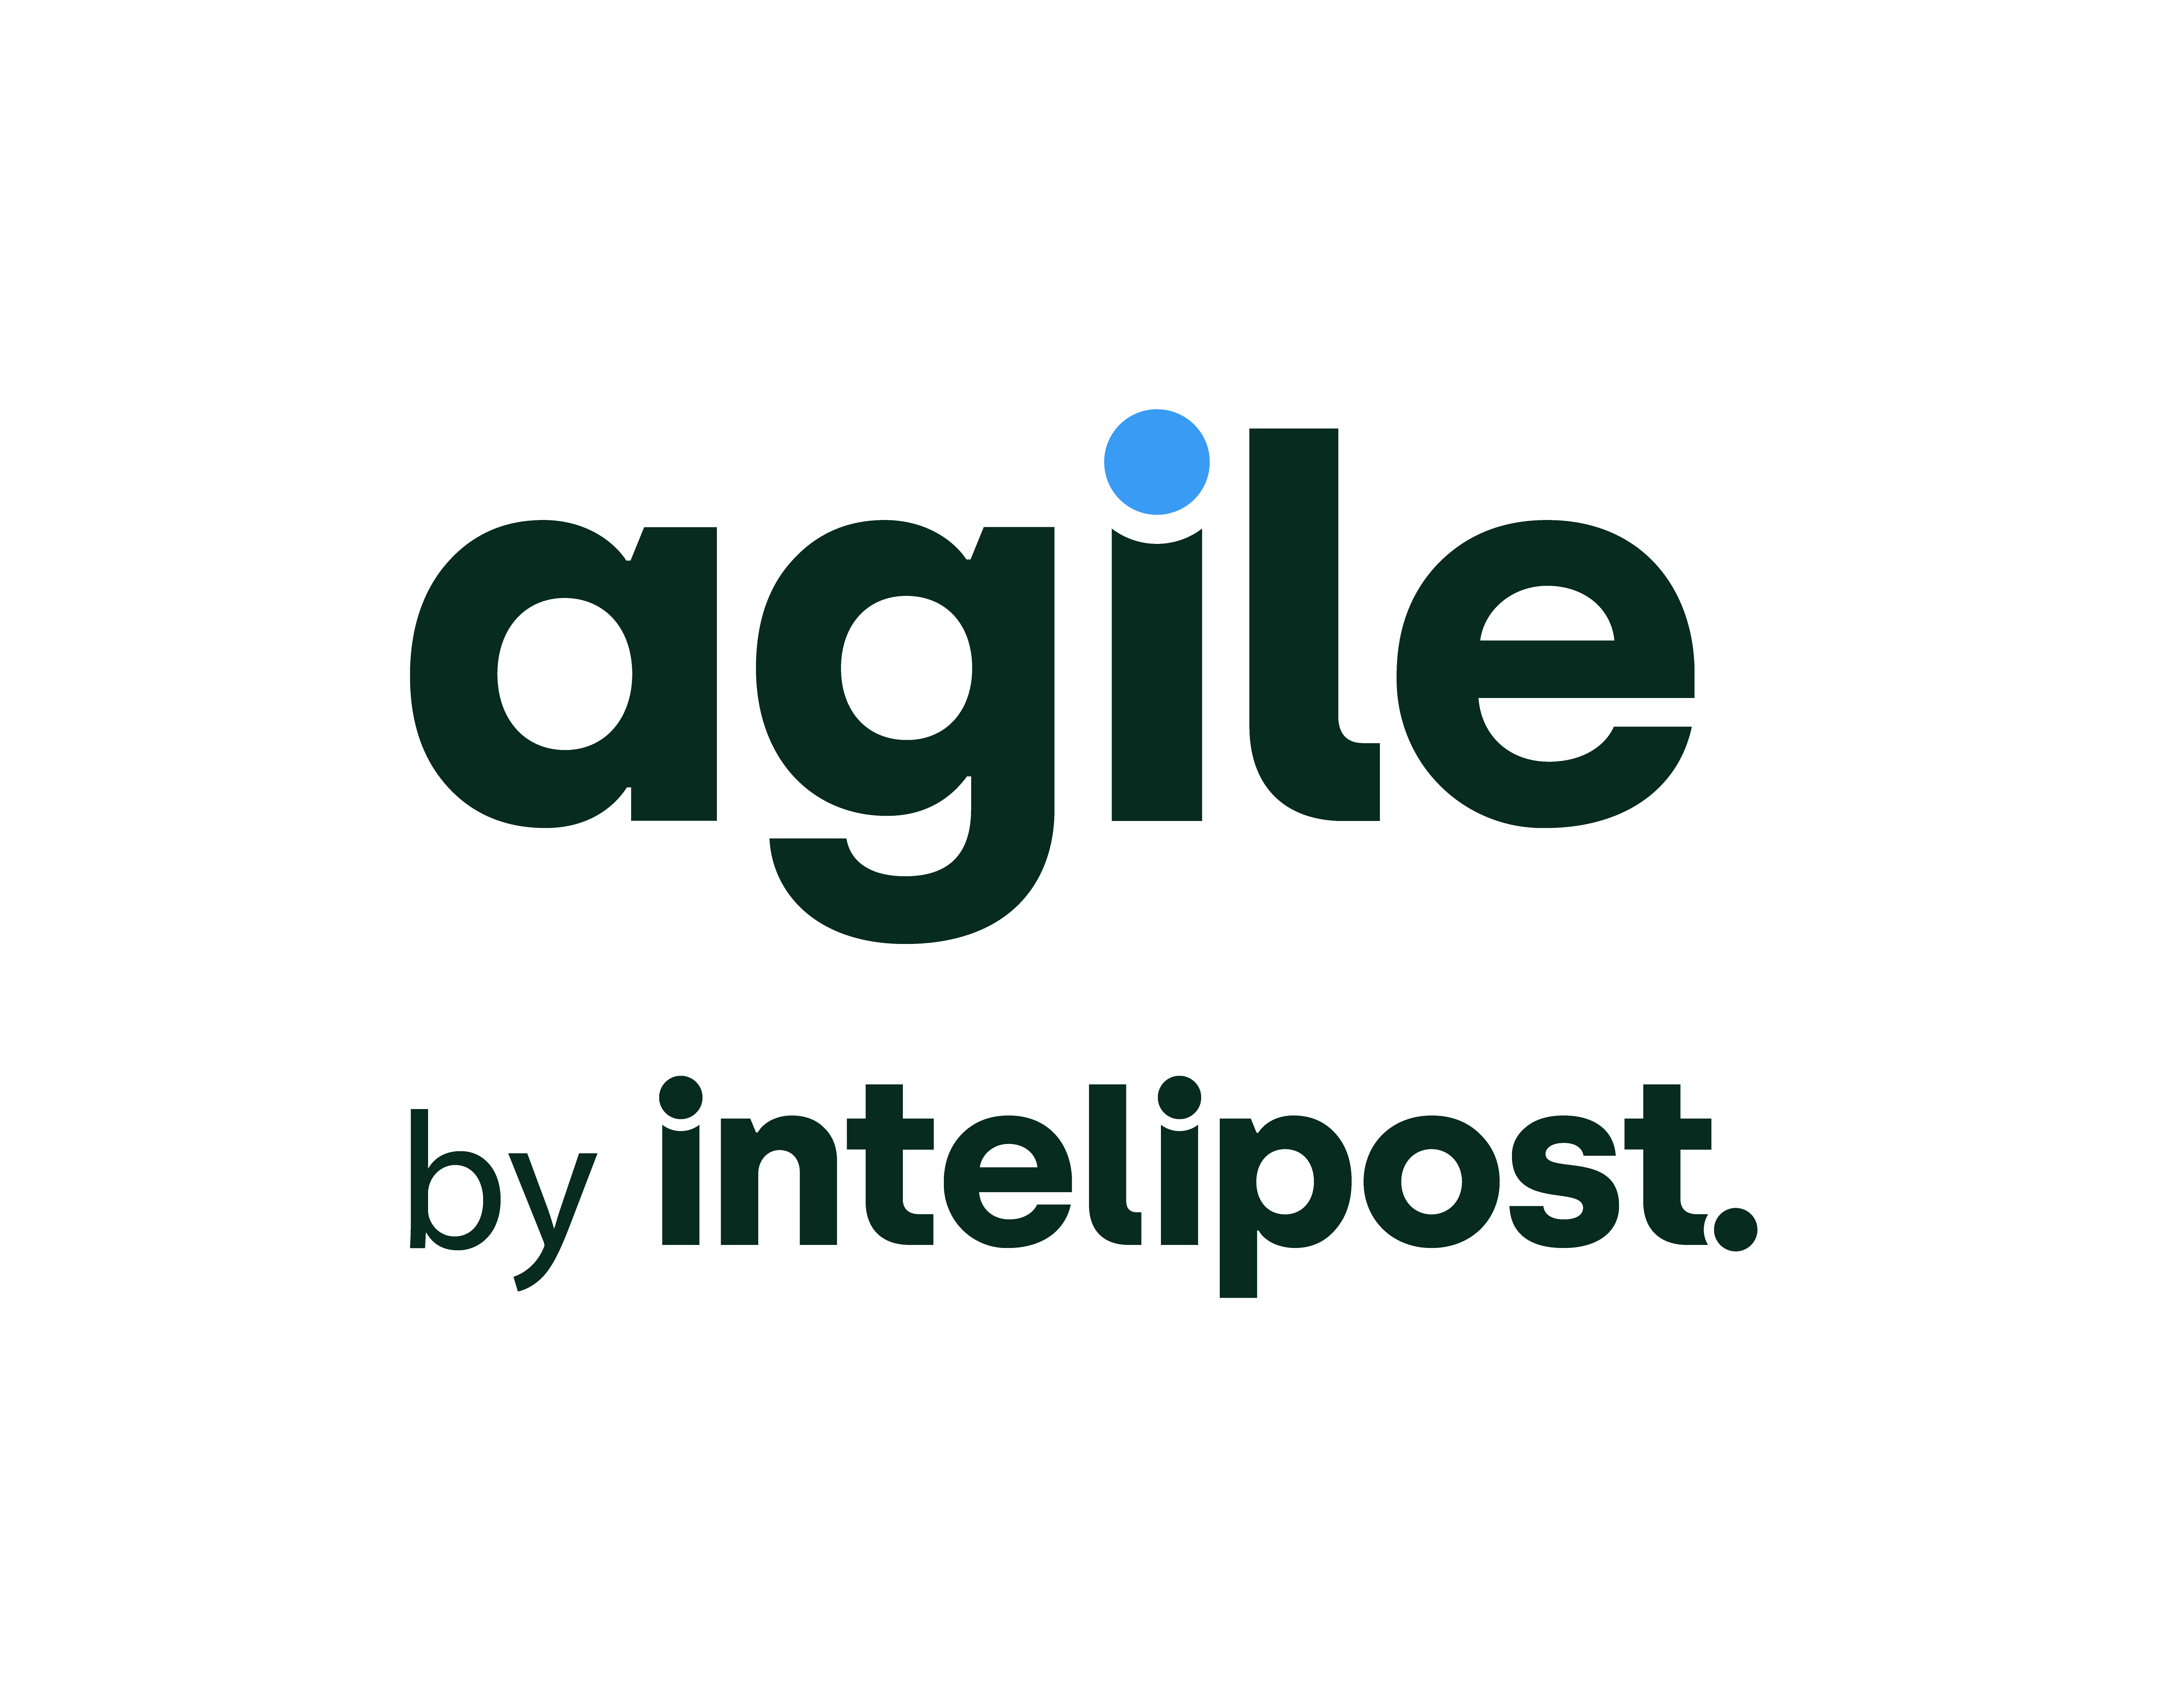 Agile by Intelipost